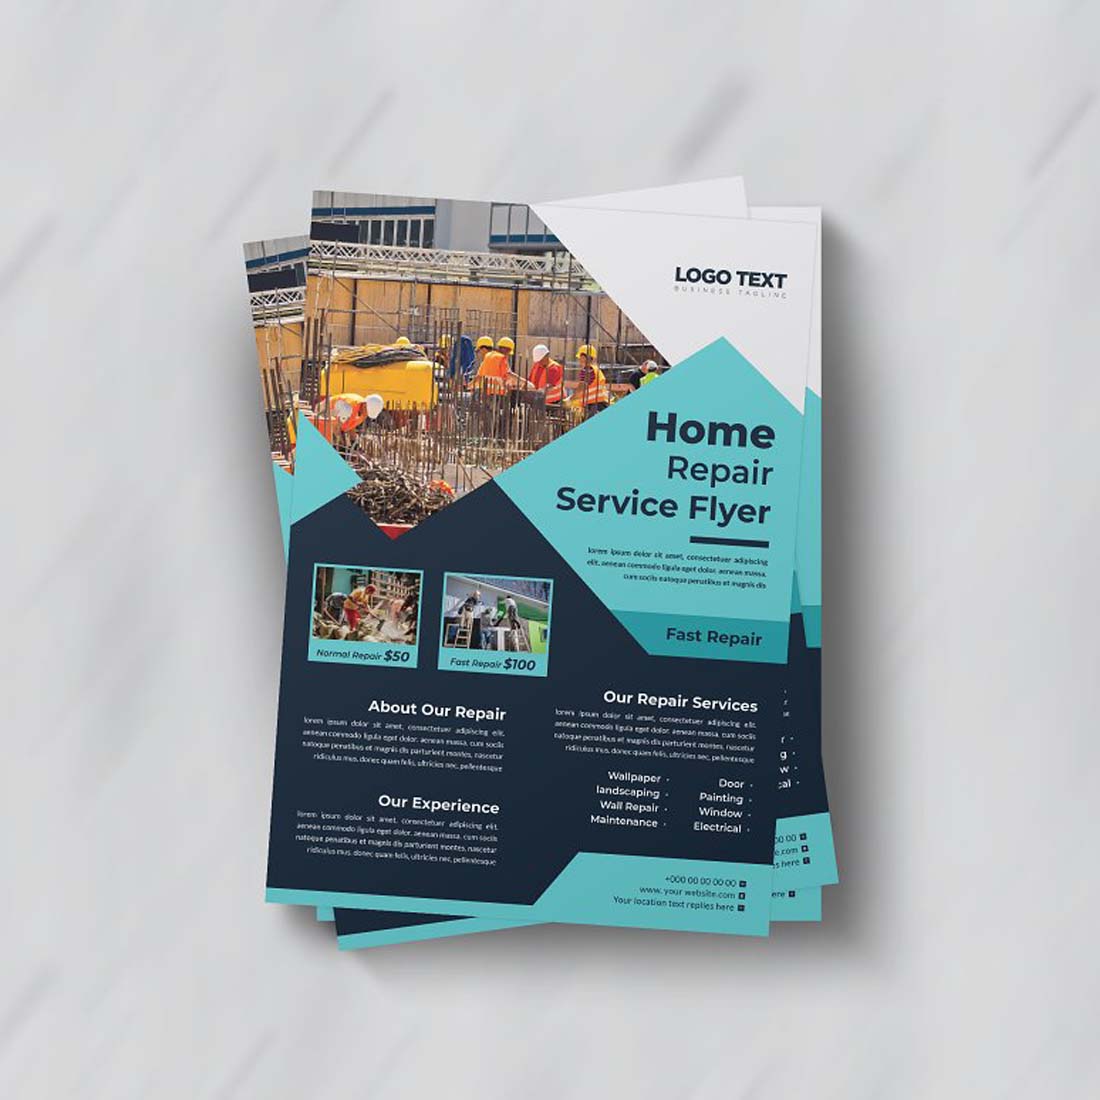 Home Repair Flyer preview image.